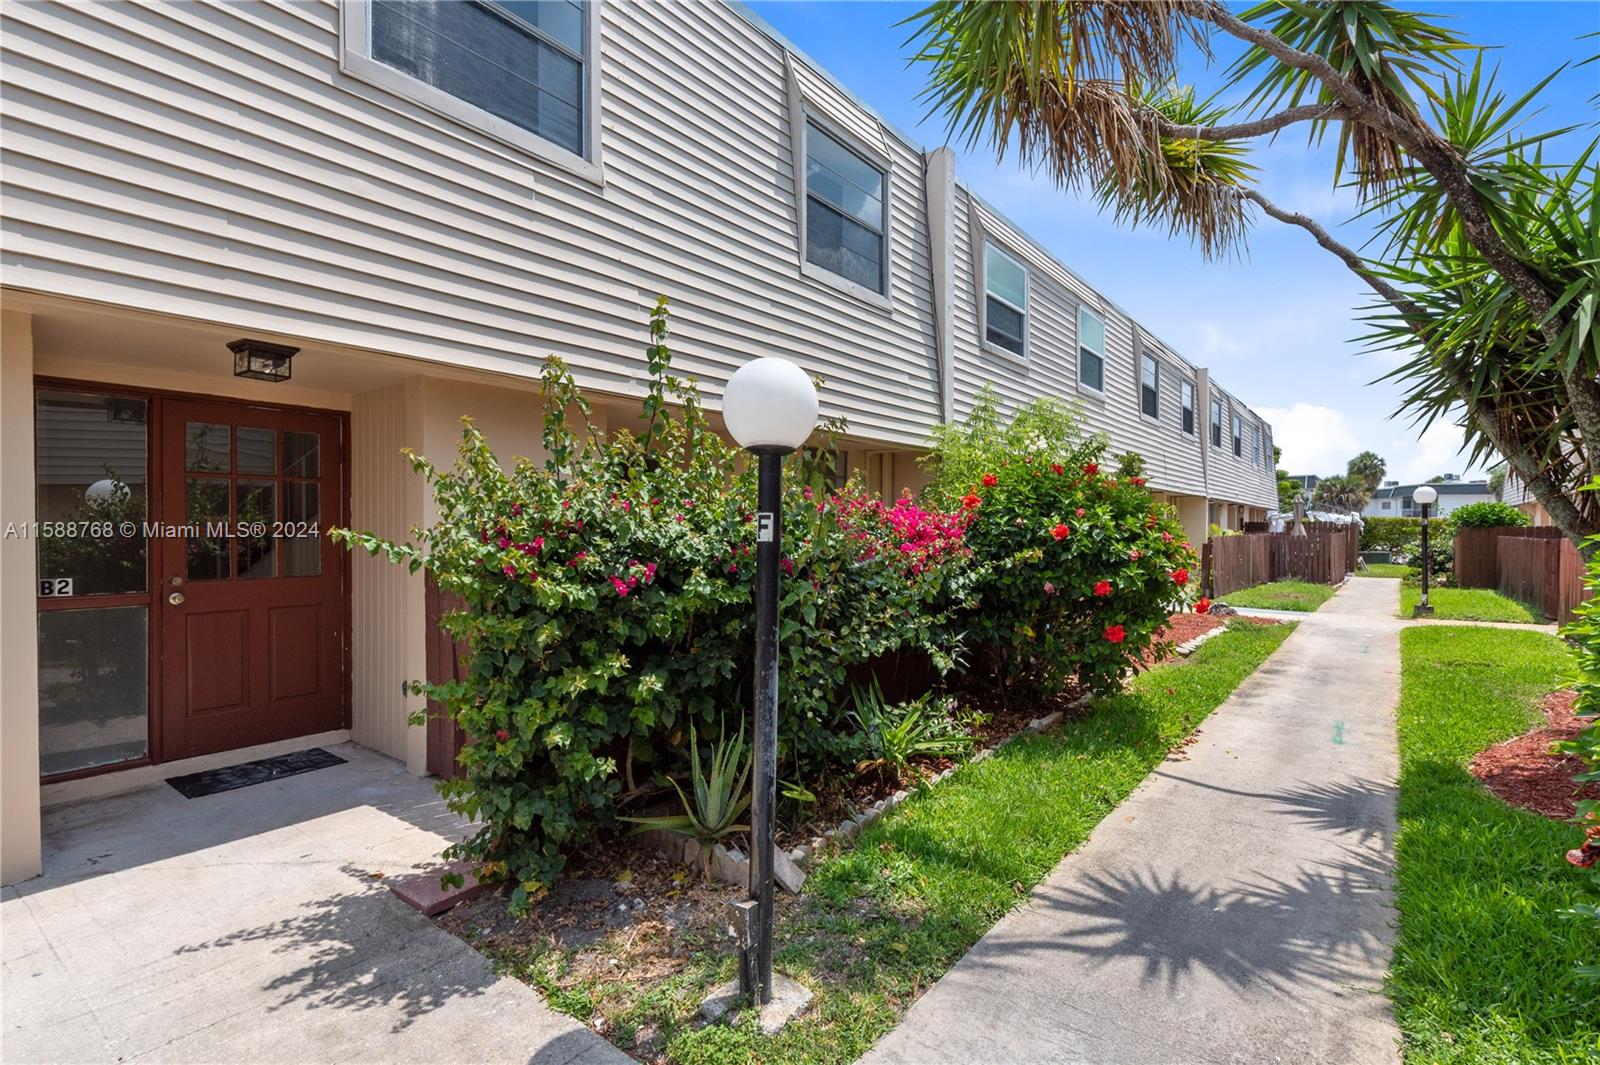 View Margate, FL 33063 townhome